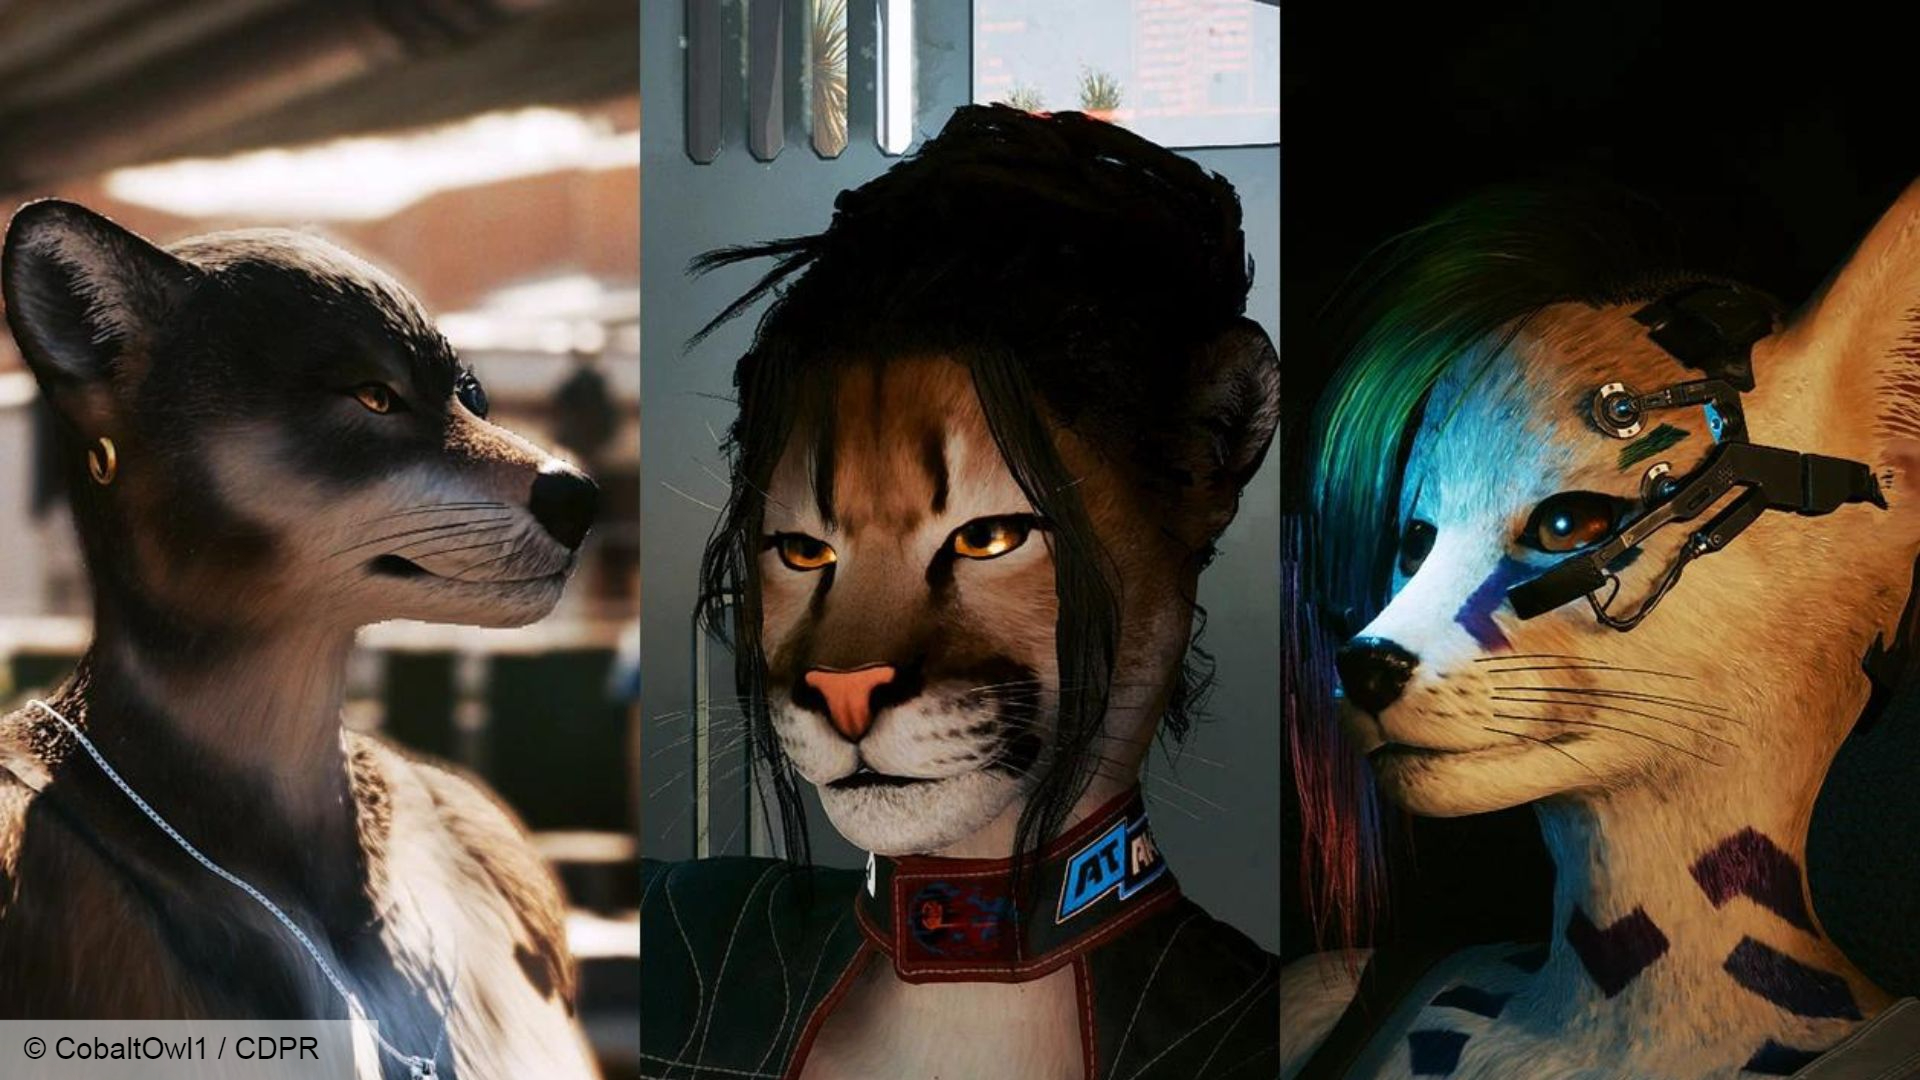 Cyberpunk 2077 has furries now, and they’re canon